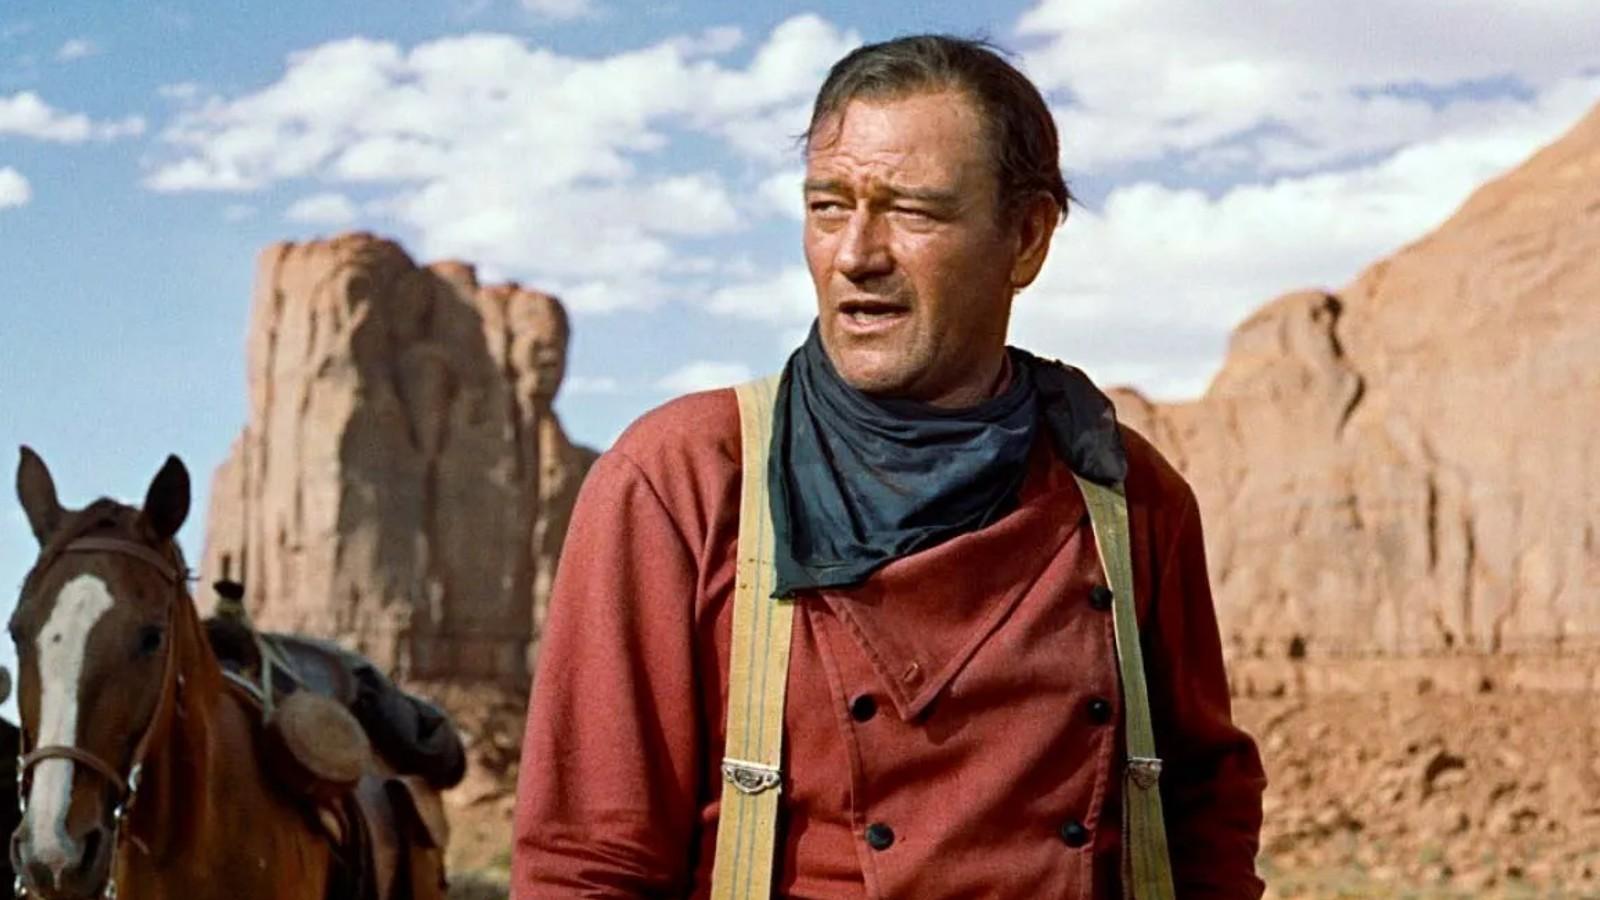 John Wayne in Monument Valley in The Searchers.